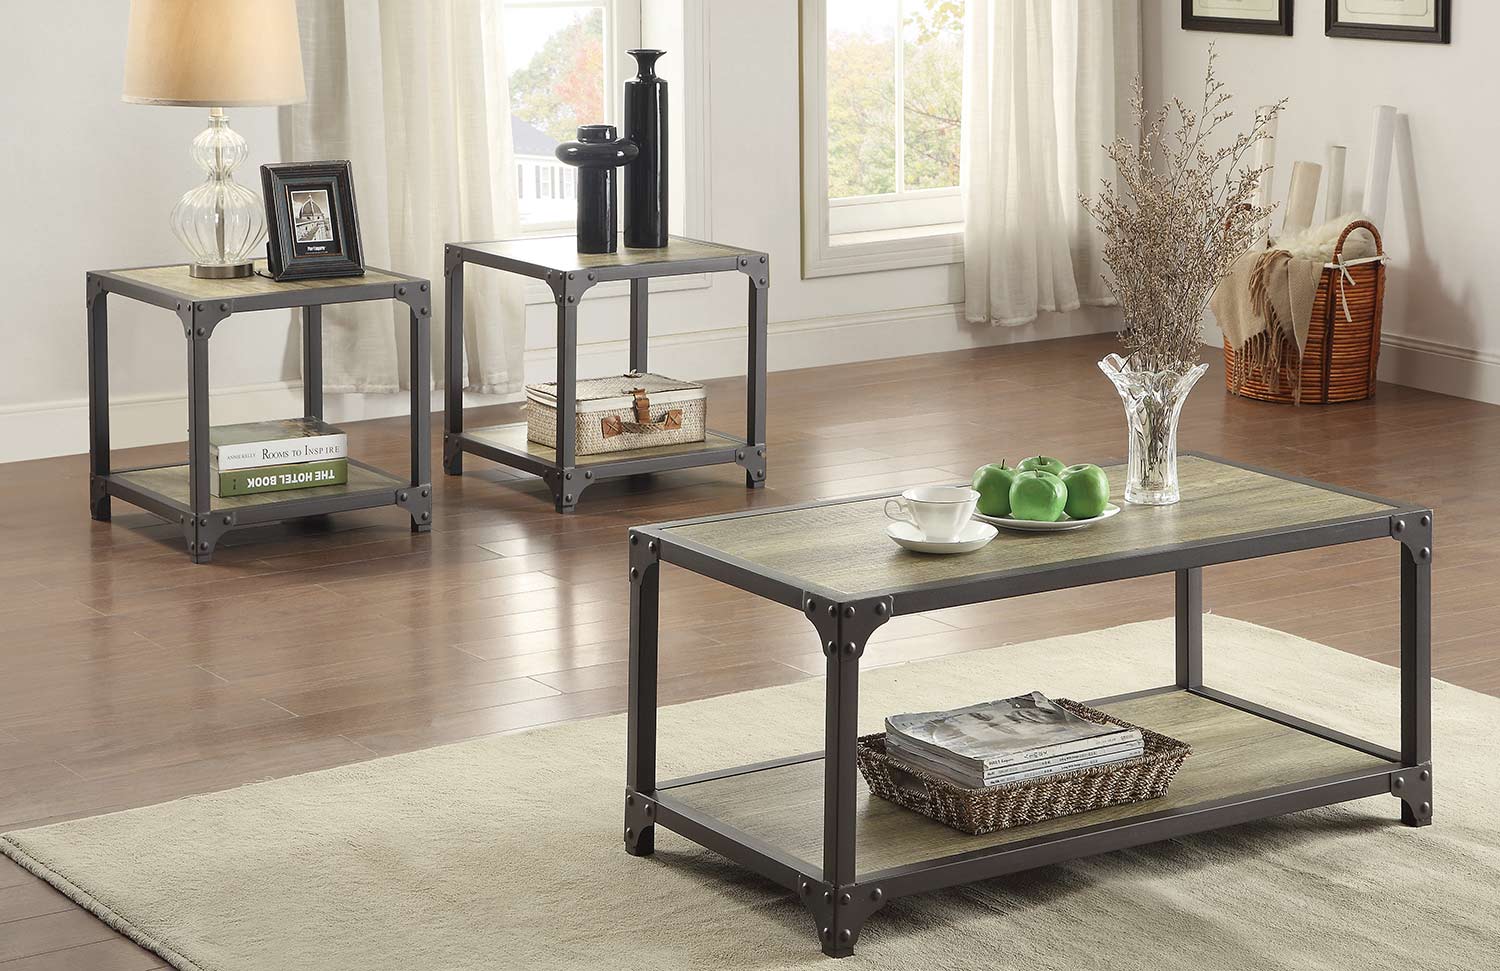 Homelegance Rumi Coffee Table Set - Light Burnished Wood with Metal Frame